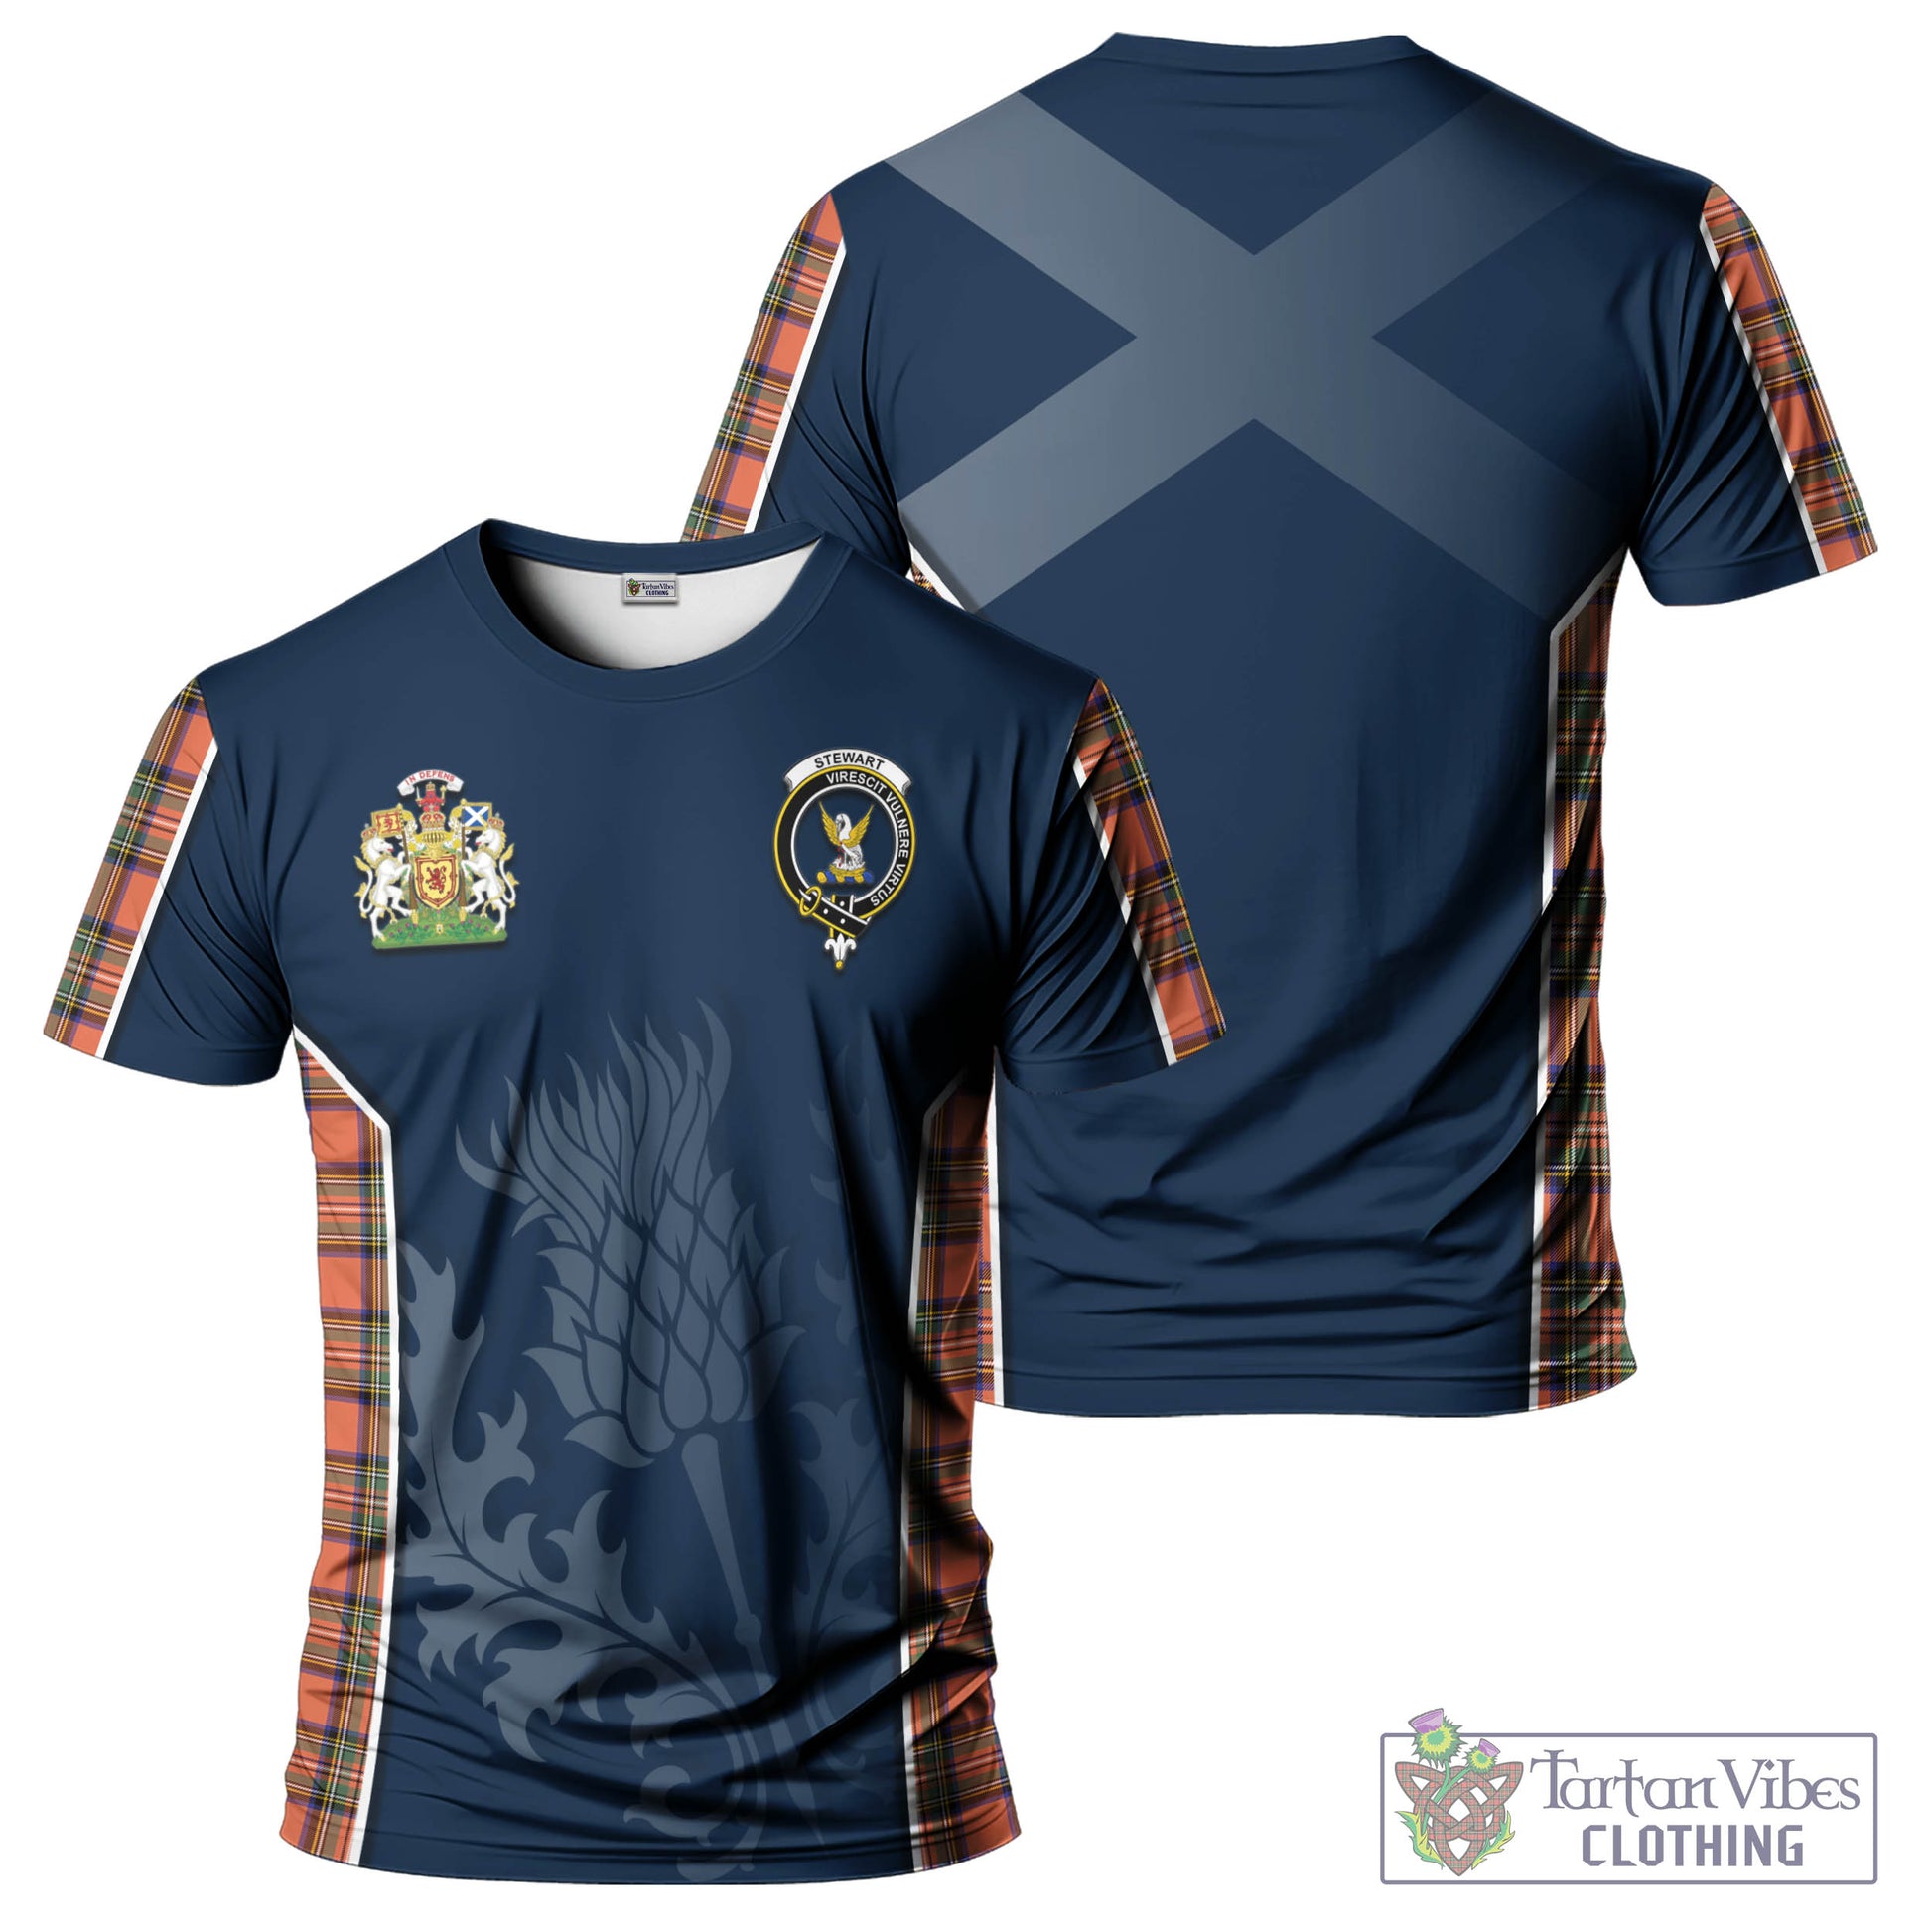 Tartan Vibes Clothing Stewart Royal Ancient Tartan T-Shirt with Family Crest and Scottish Thistle Vibes Sport Style